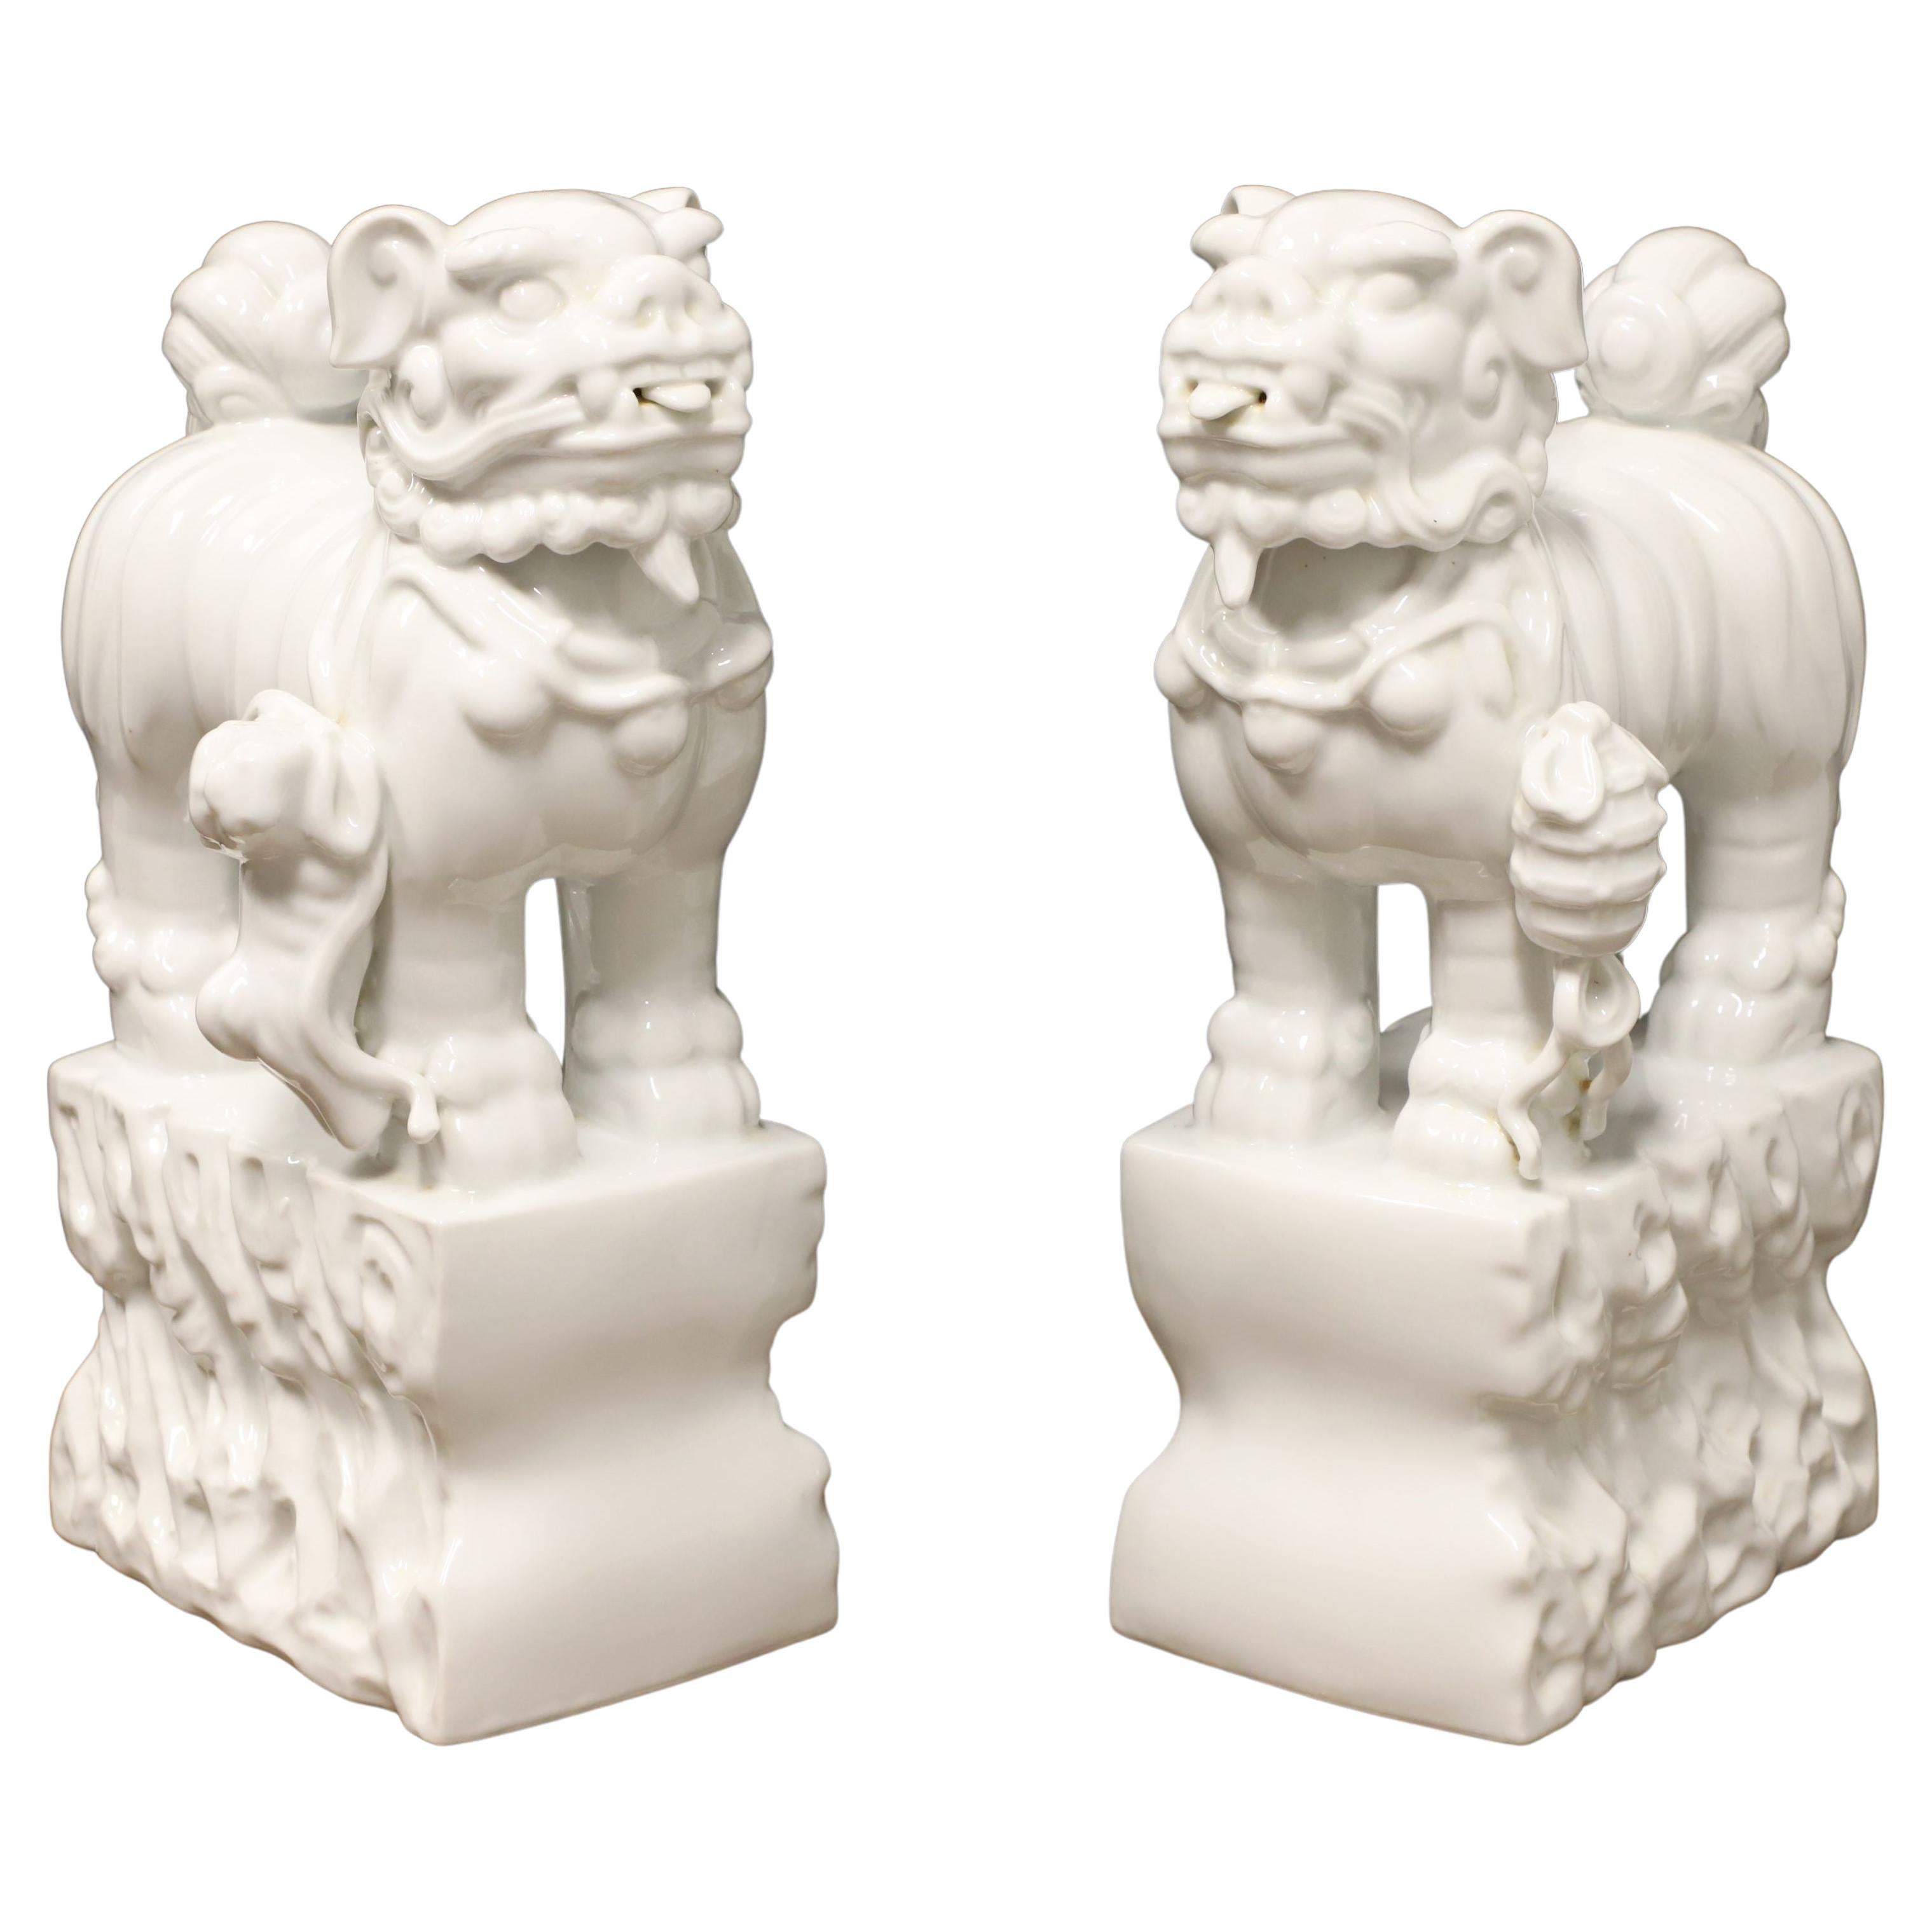 Mid 20th Century White Porcelain Foo Dogs - Pair For Sale